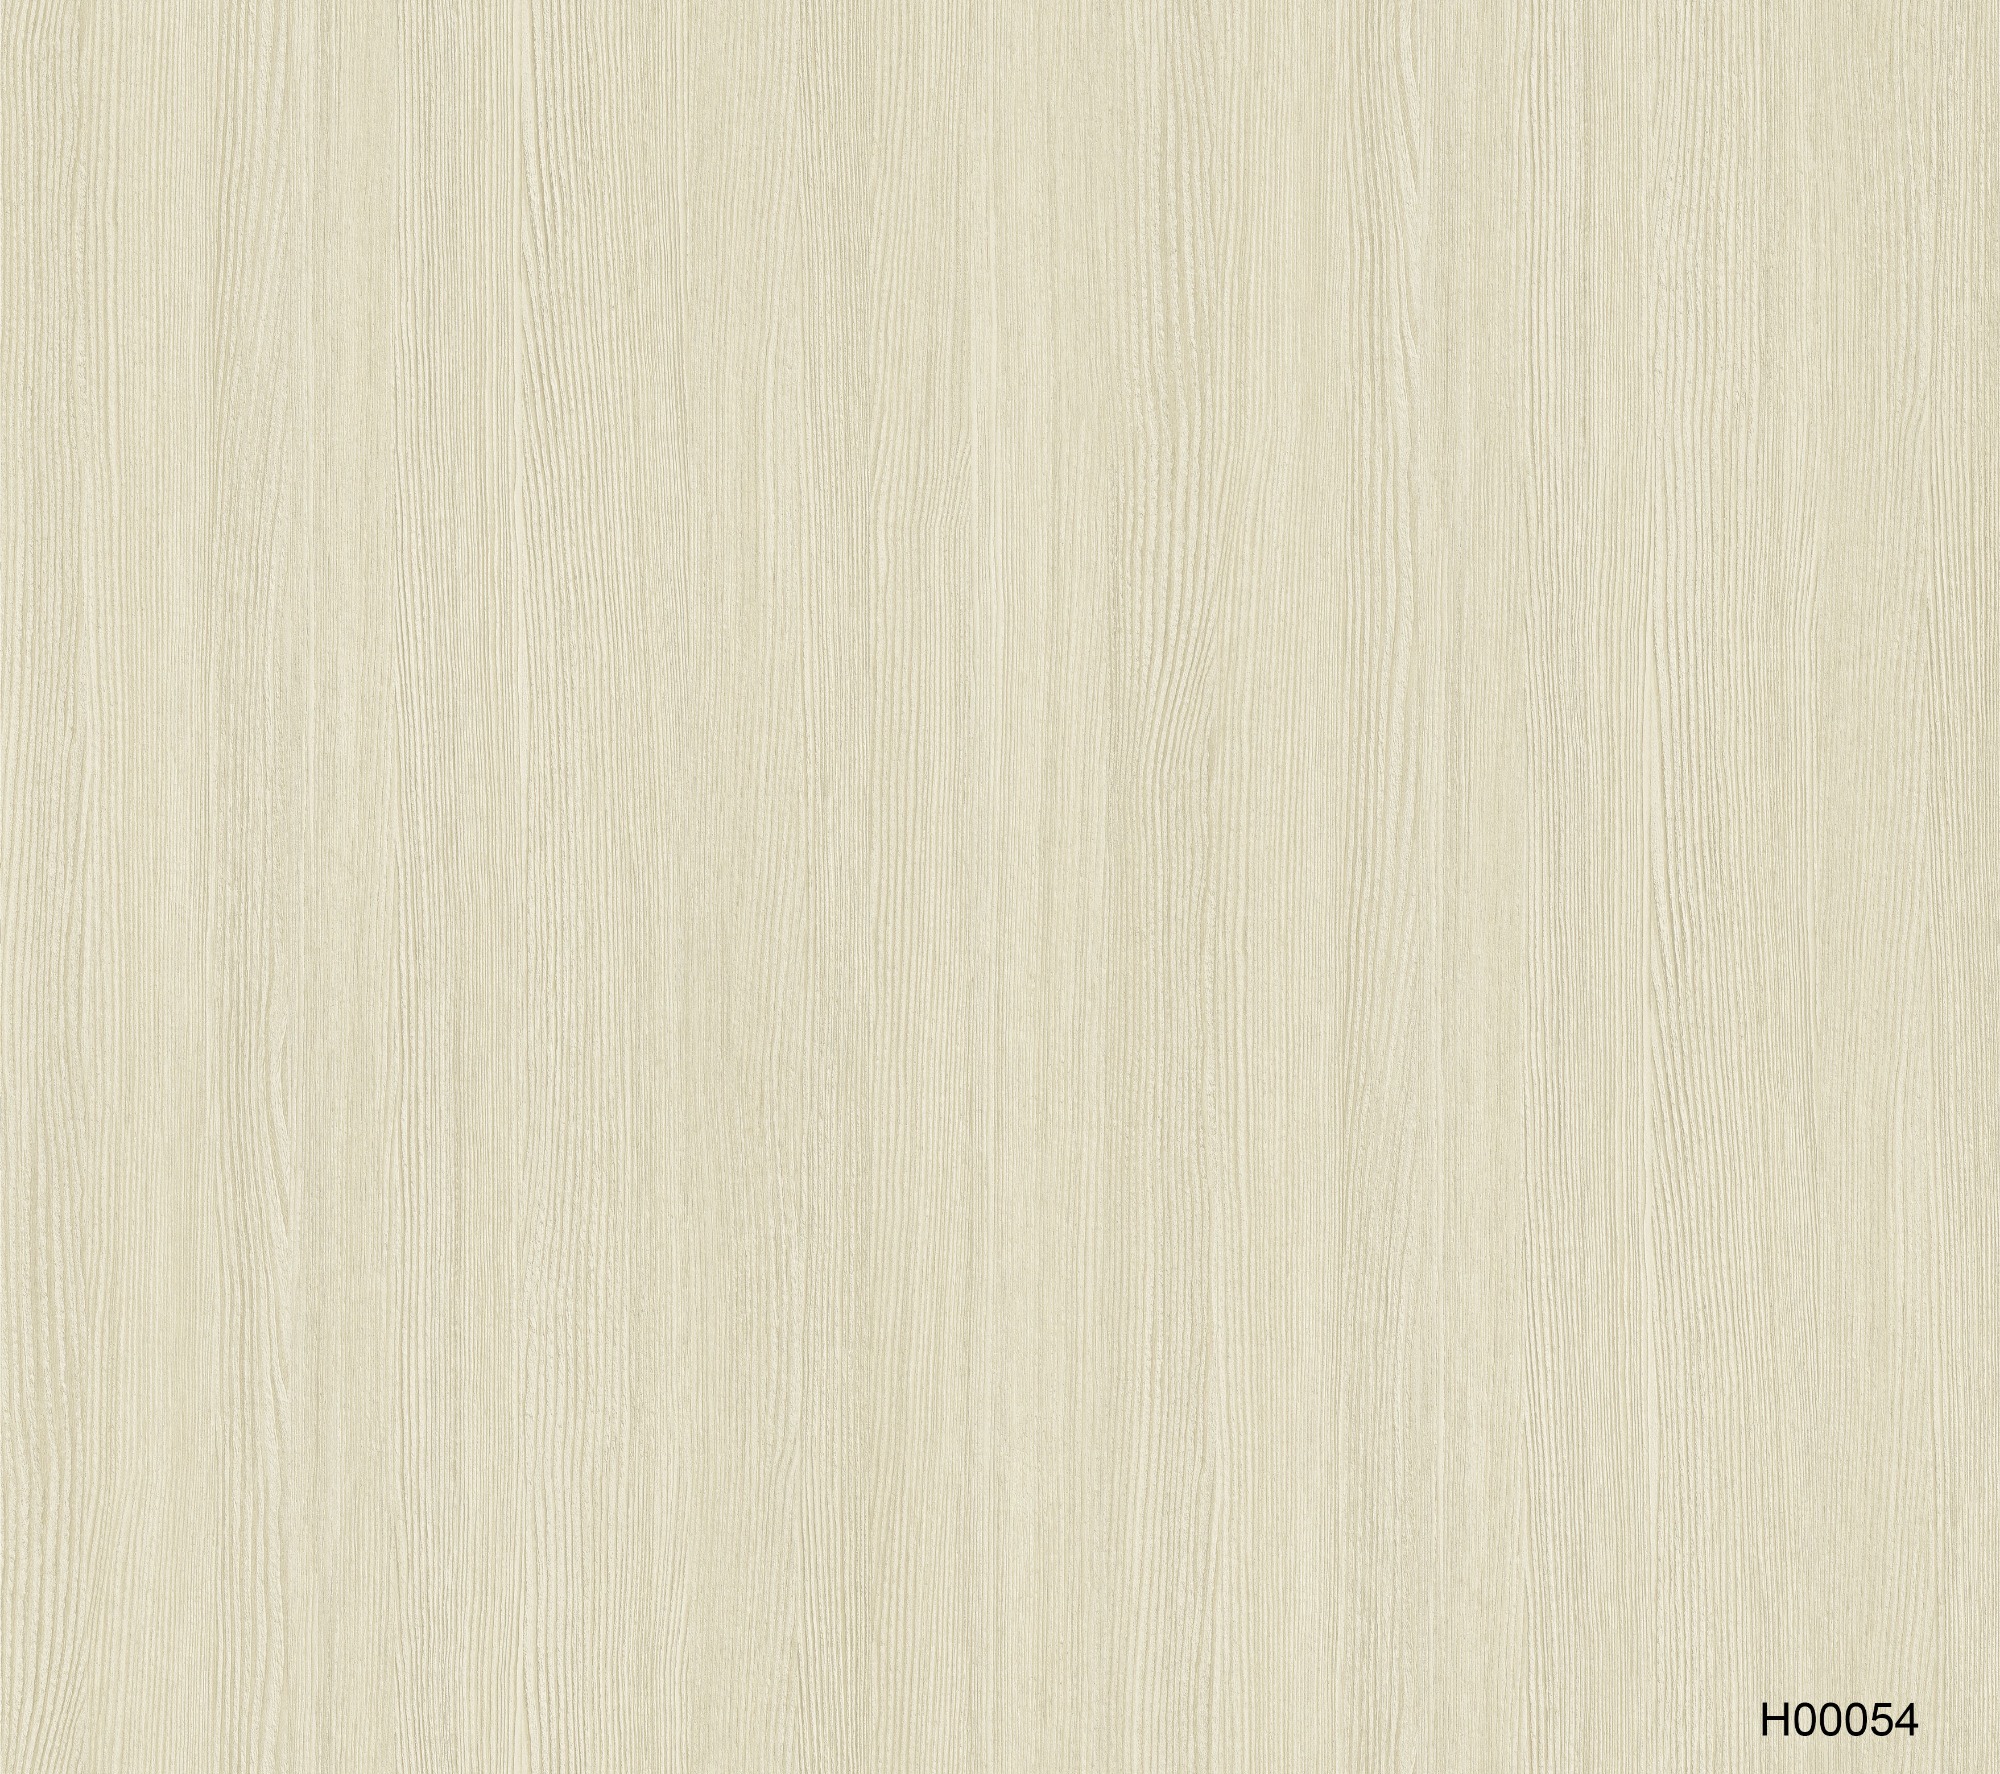 H00054 Melamine paper with wood grain